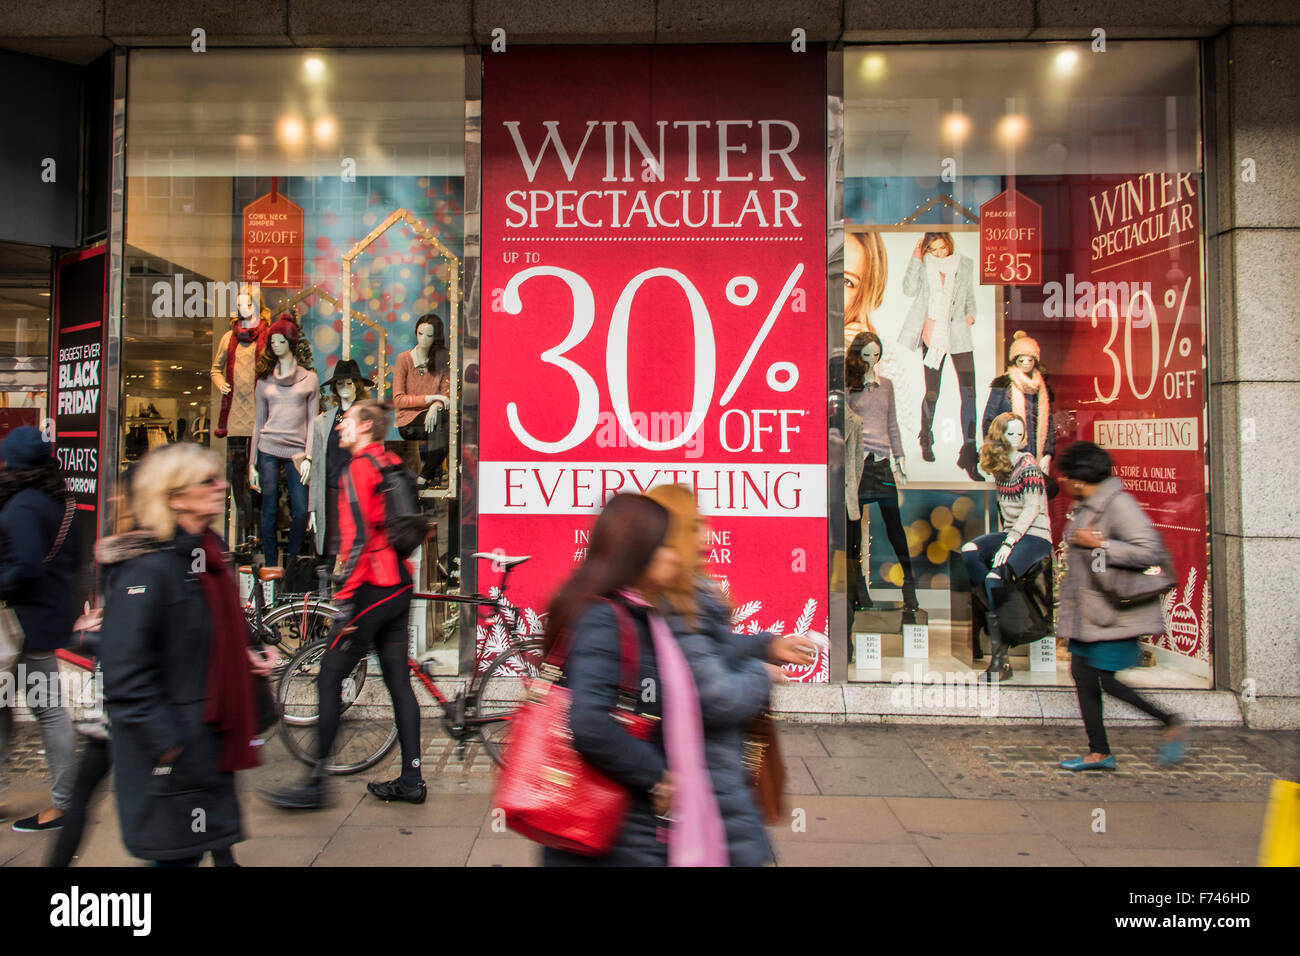 London, UK. 25th November, 2015. BHS offers upto 30% off in its winter spectacular and Black Friday sales. Oxford street prepares its discounted offerings for Black Friday. Credit:  Guy Bell/Alamy Live News Stock Photo